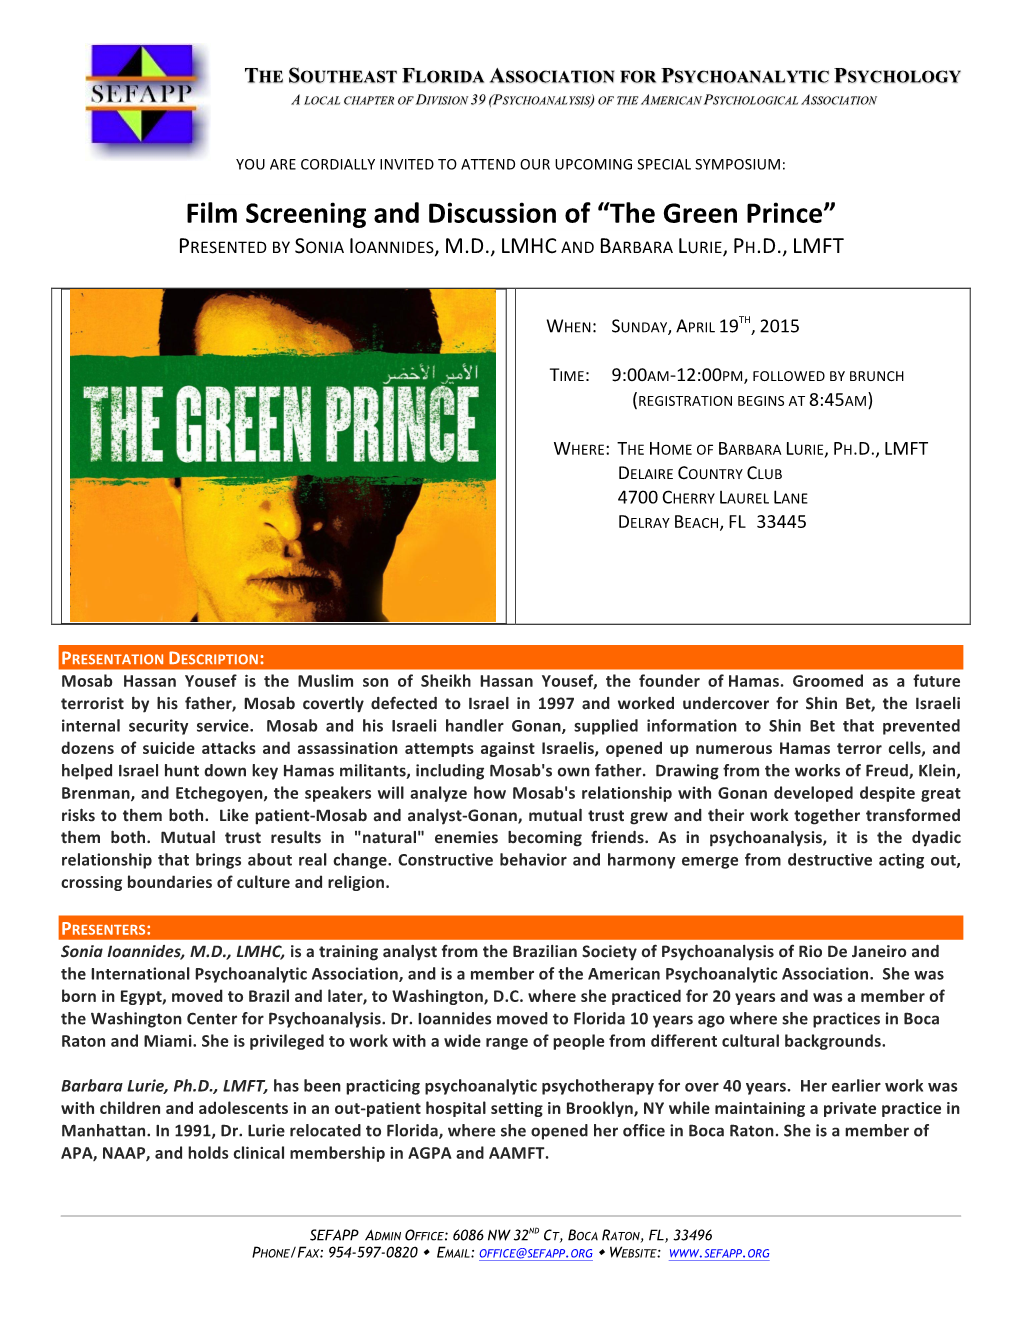 The Green Prince” PRESENTED by SONIA IOANNIDES, M.D., LMHC and BARBARA LURIE, PH.D., LMFT